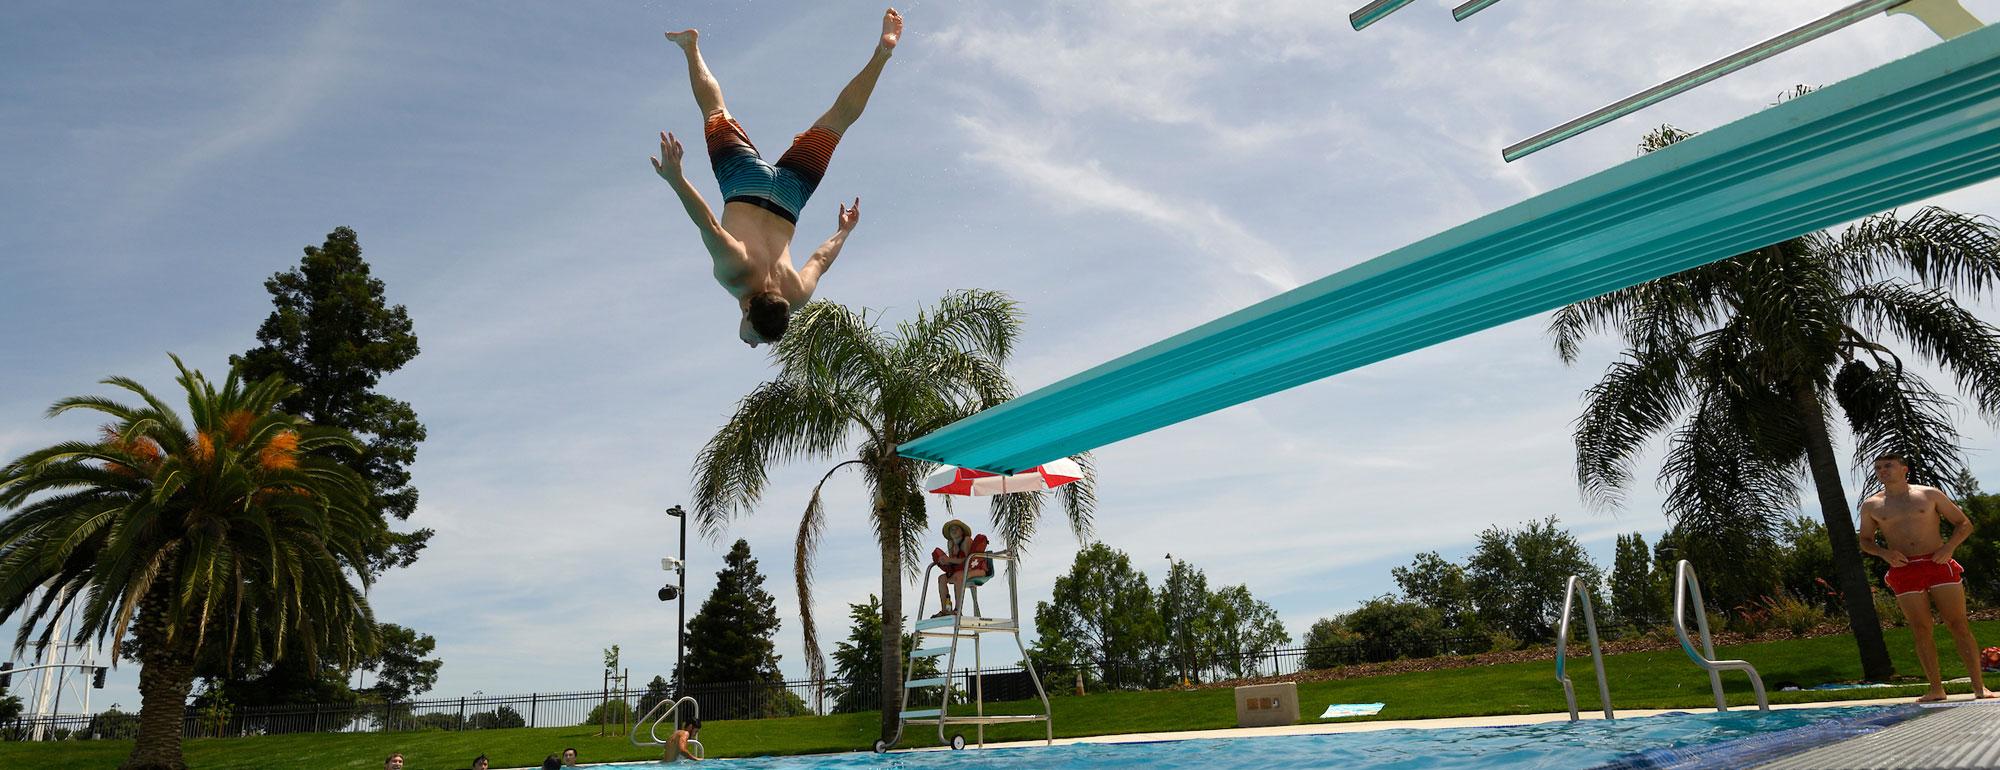 A student doing an acrobatic jump of of the diving board at the ϲʿͼ Recreation Pool